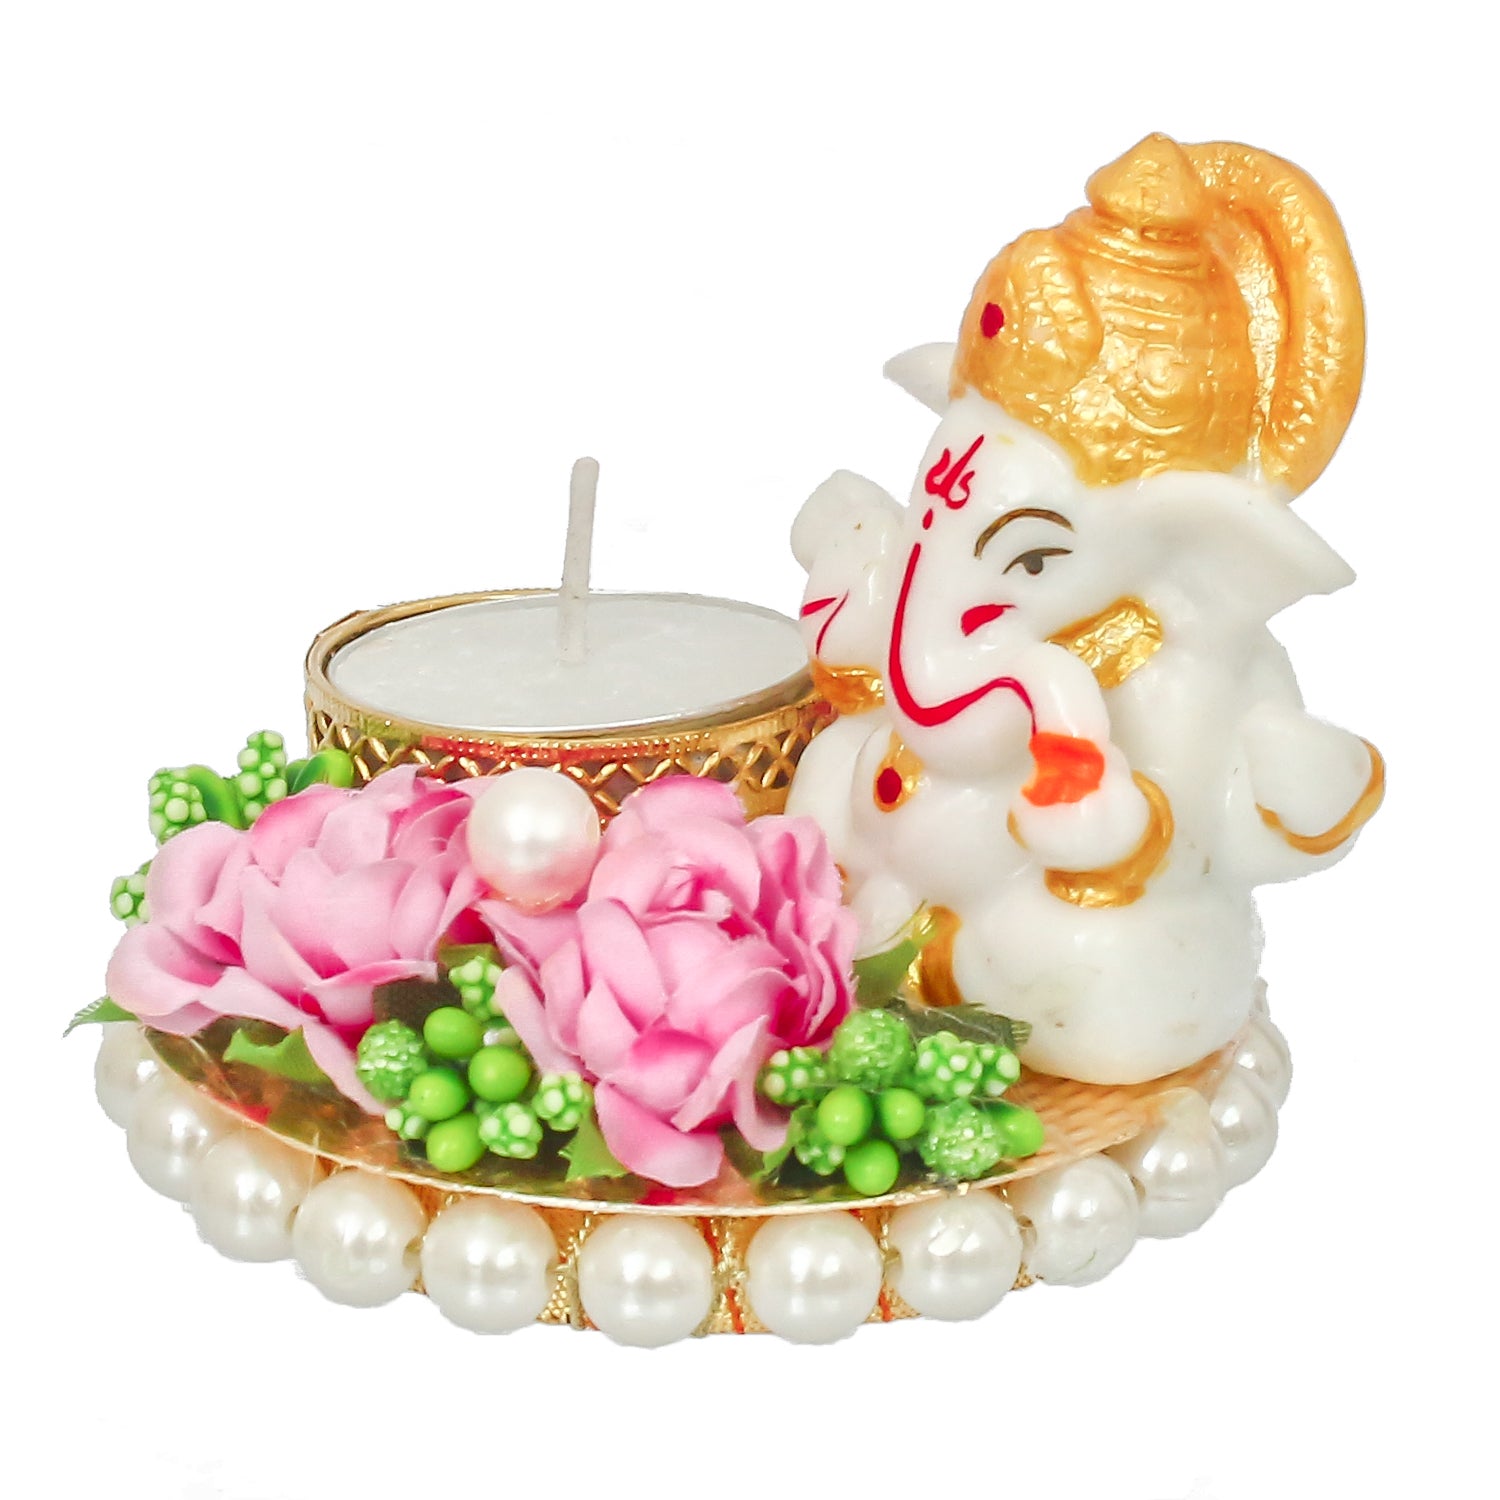 Polyresin Lord Ganesha Idol on Decorative Metal Plate with Tea Light Holder (Pink, Green and White) 6